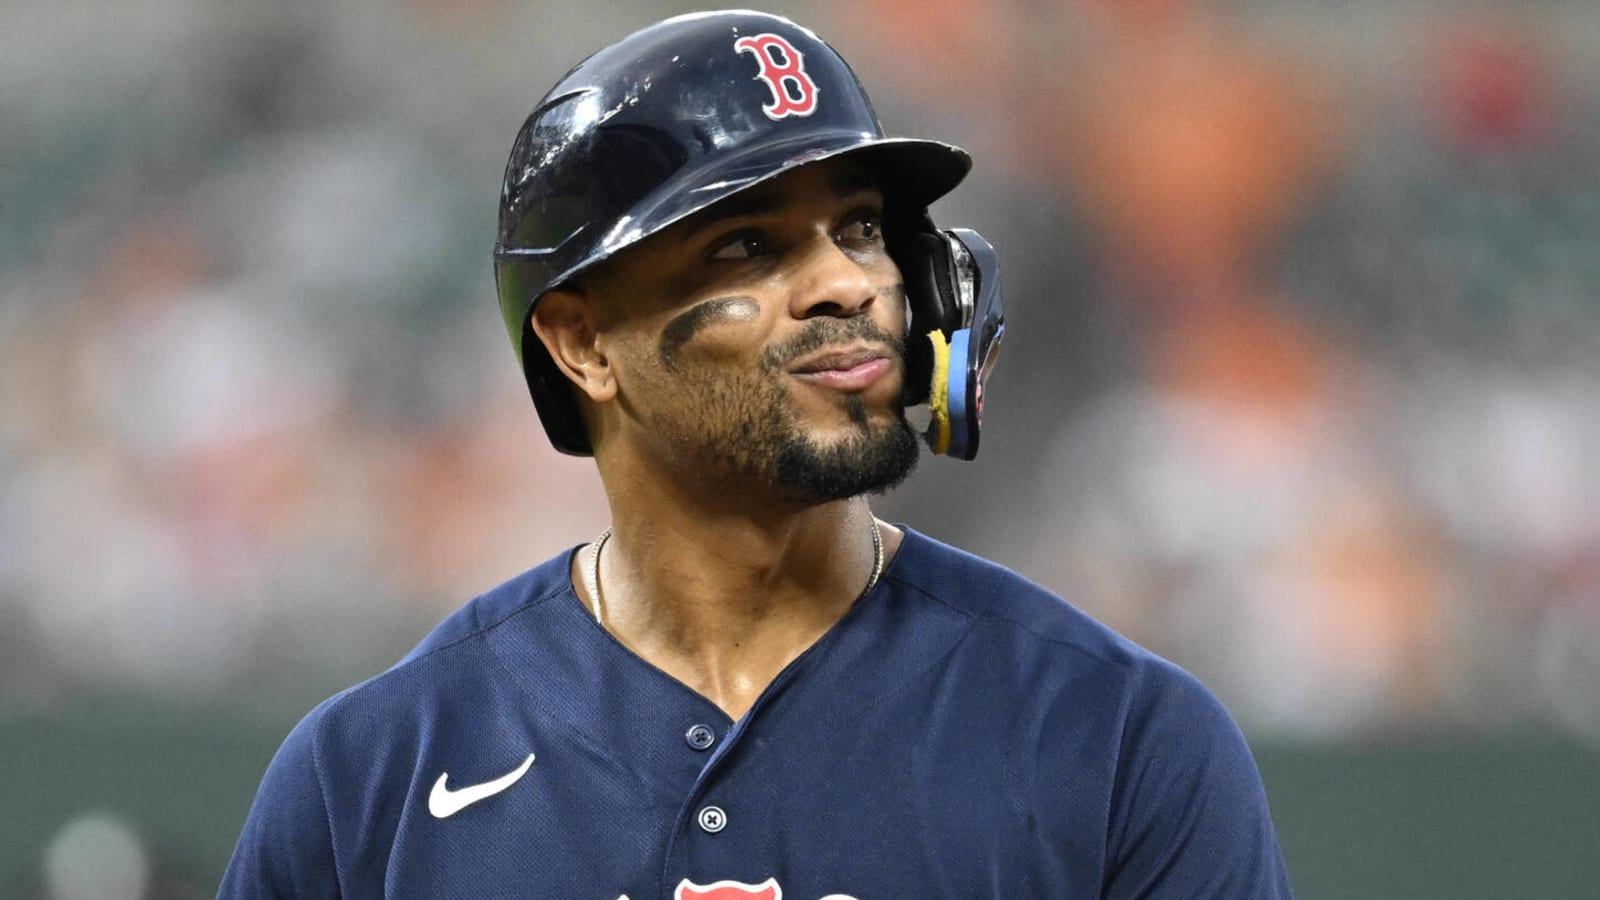 Red Sox’s CBO Chaim Bloom: Signing All-Star Xander Bogaerts a top priority this offseason